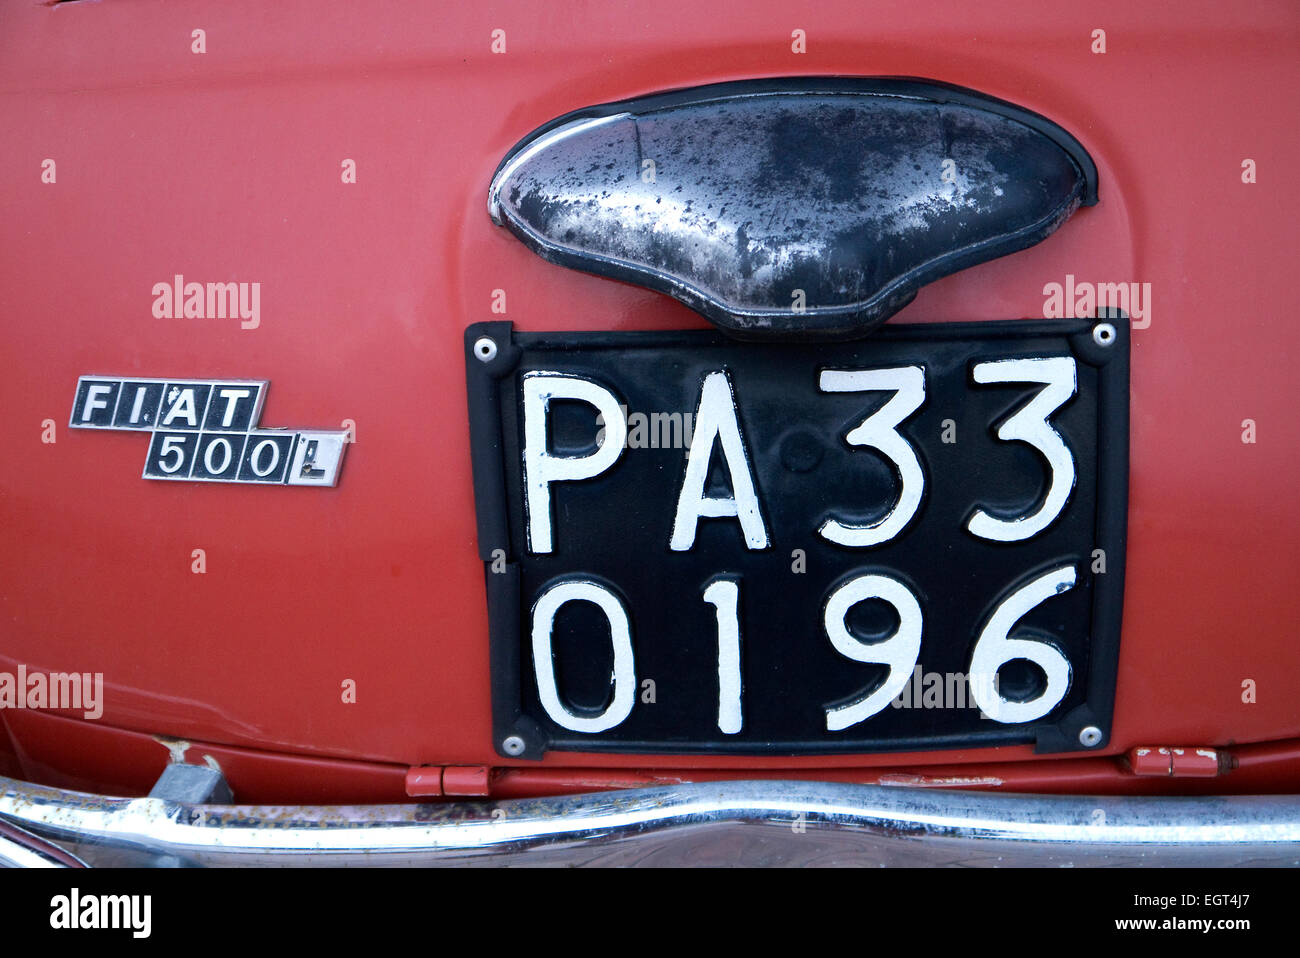 Classic Fiat 500 with Palermo number plate in Sicily Stock Photo